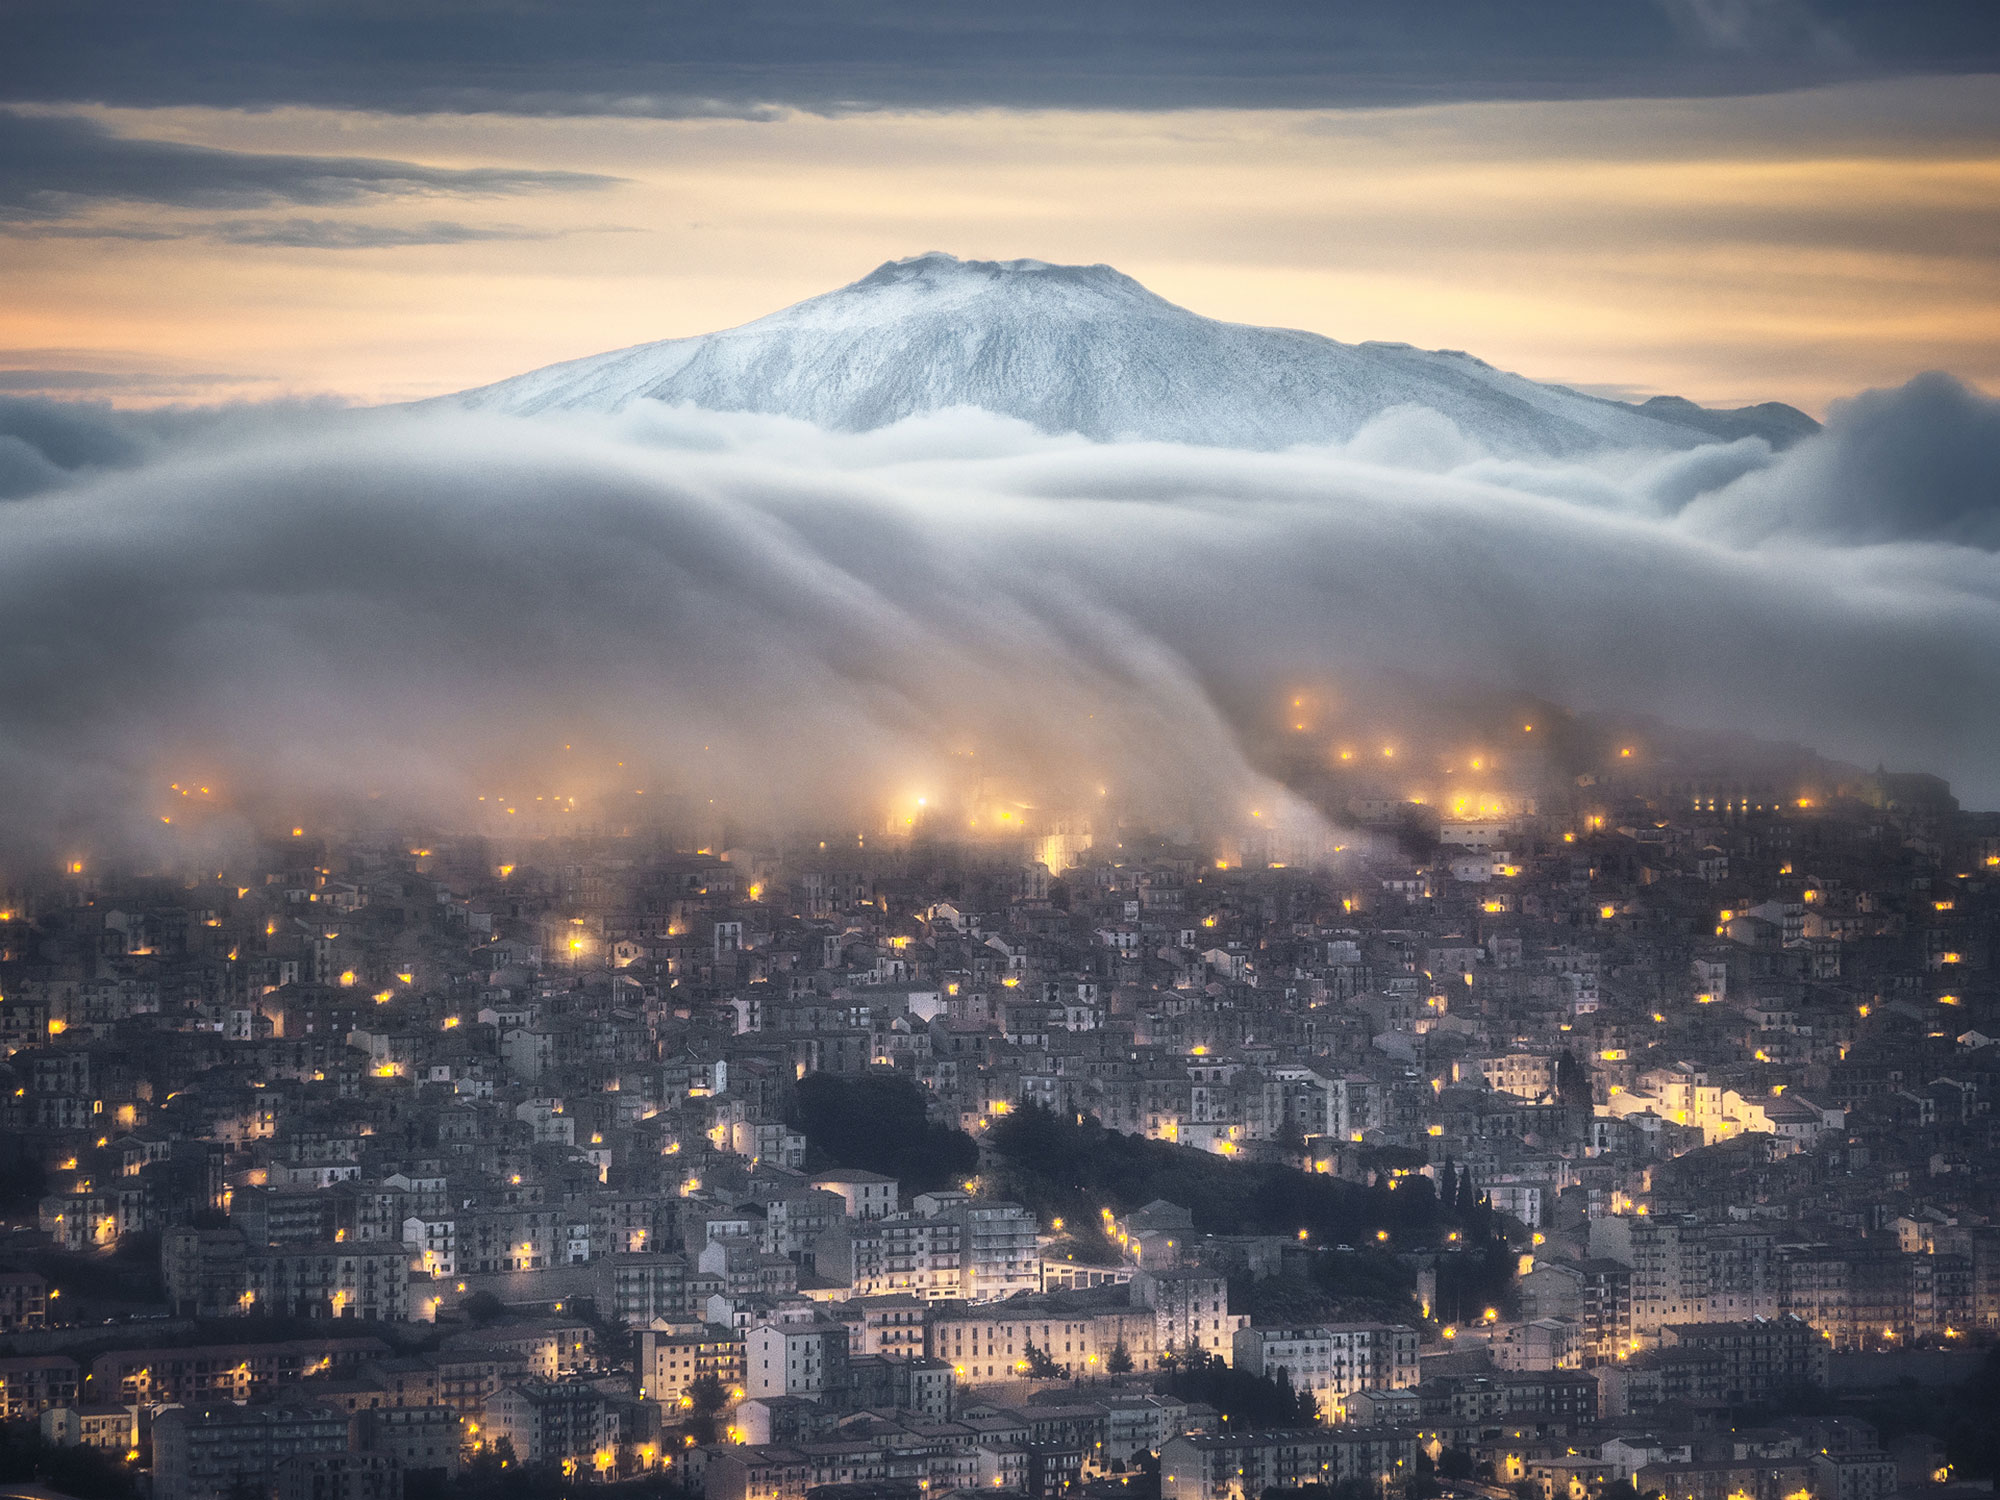 In the Shadow of the Volcano – The story behind this image